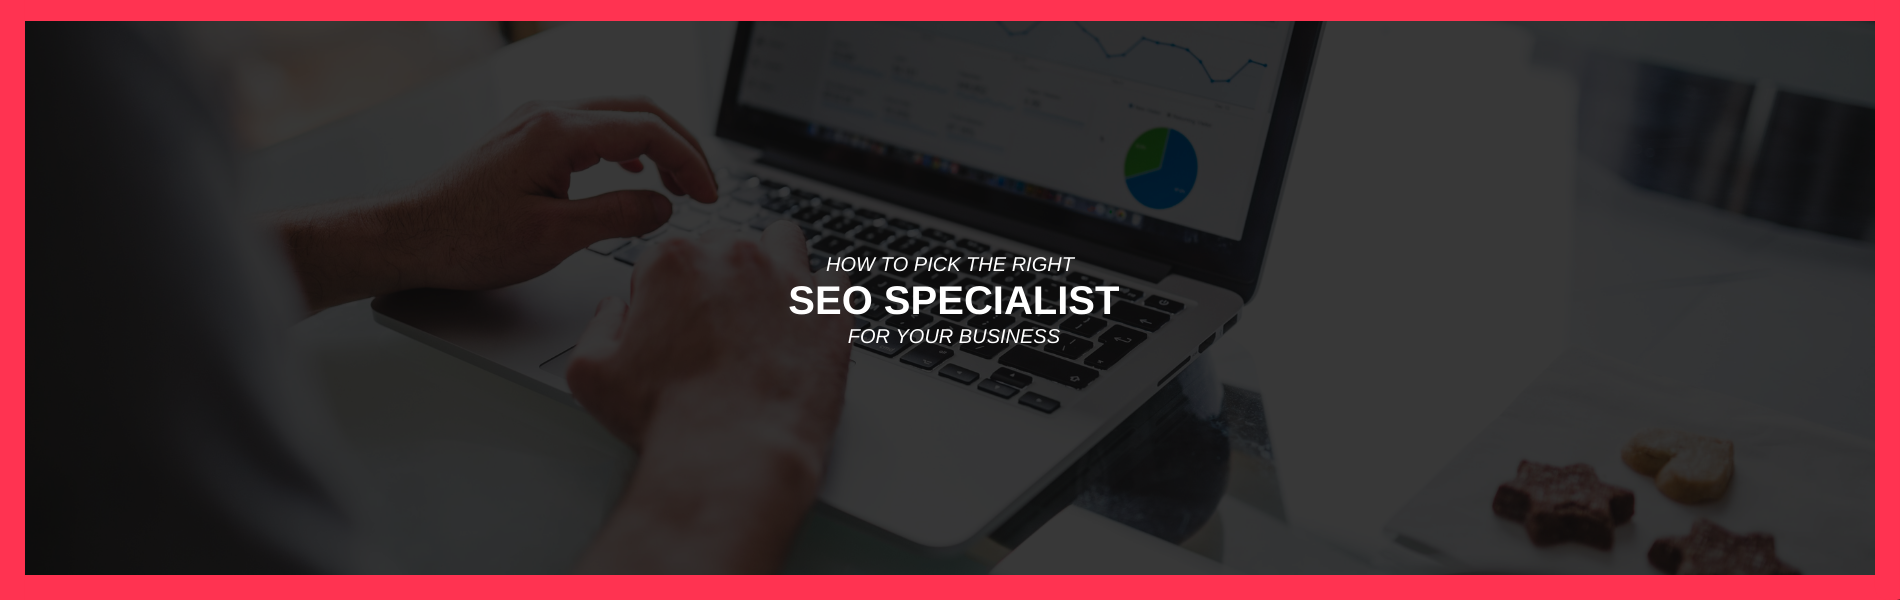 How to Pick the Right SEO Specialist for Your Business